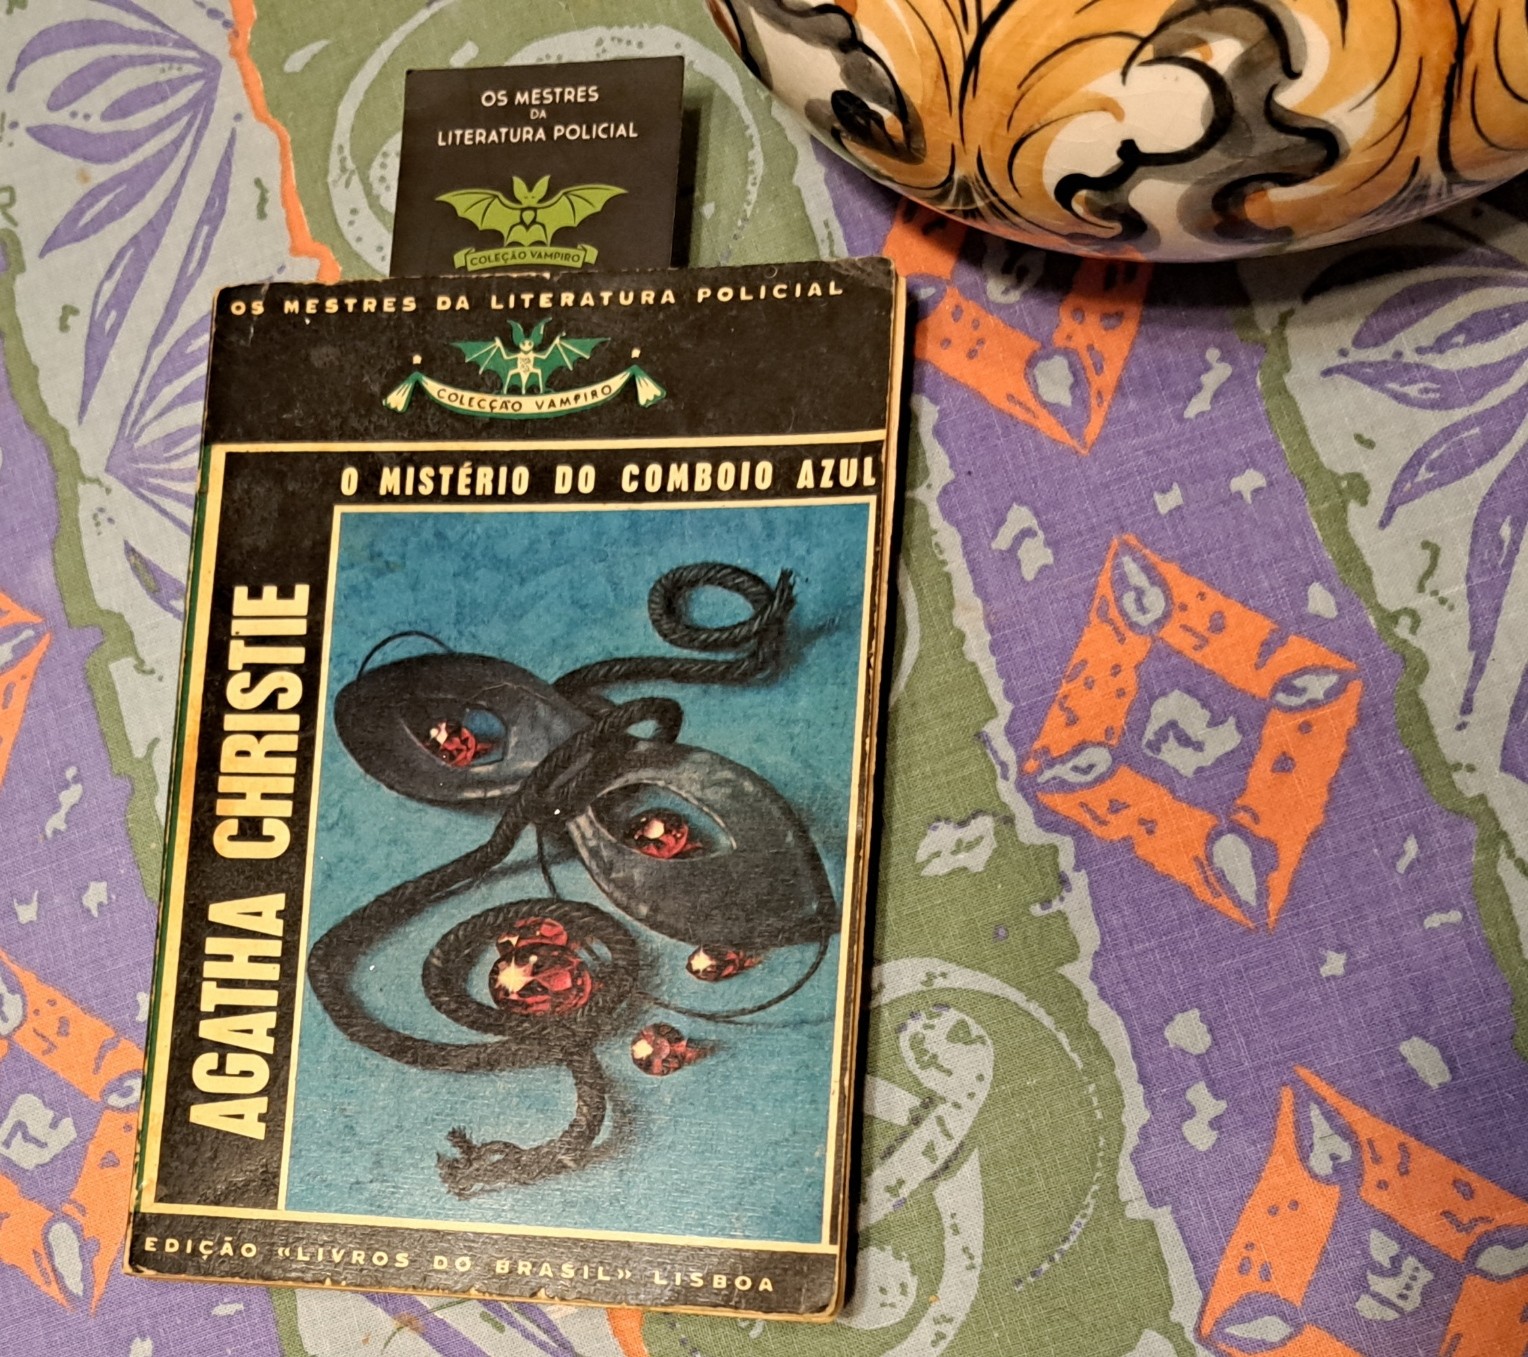 The first Portuguese edition of Agatha Christie's "The Mystery of the Blue Train"